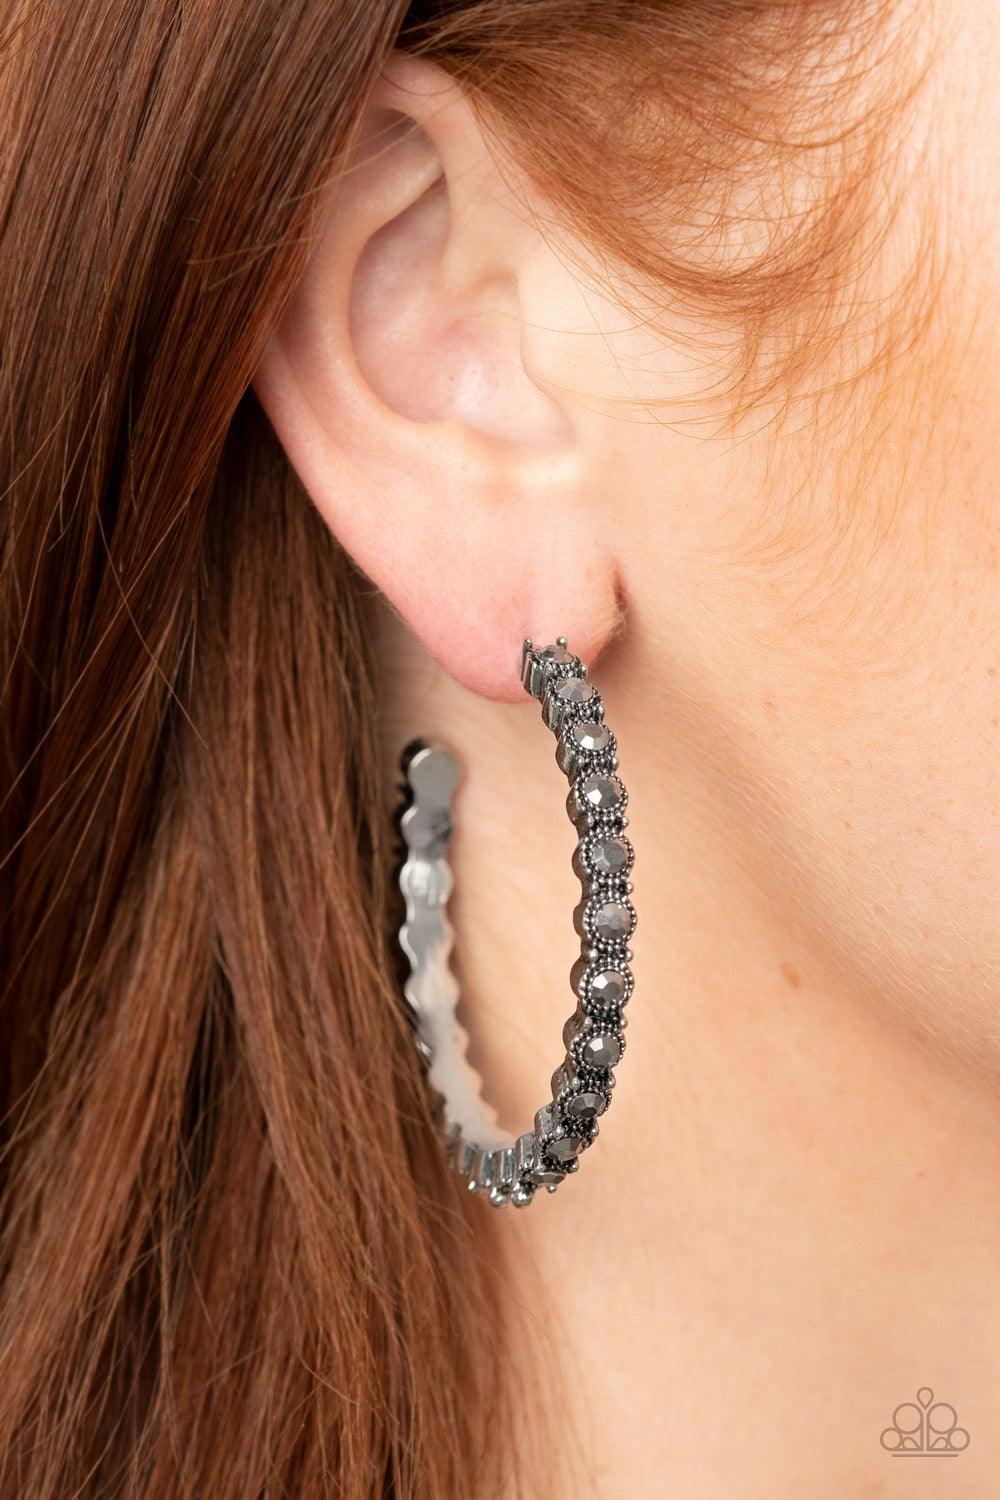 Paparazzi Accessories Rhinestone Studded Sass - Silver The front half of an ornately studded silver hoop is encrusted in smoky hematite rhinestones, adding a splash of exaggerated sparkle to the sassy display. Earring attaches to a standard post fitting.